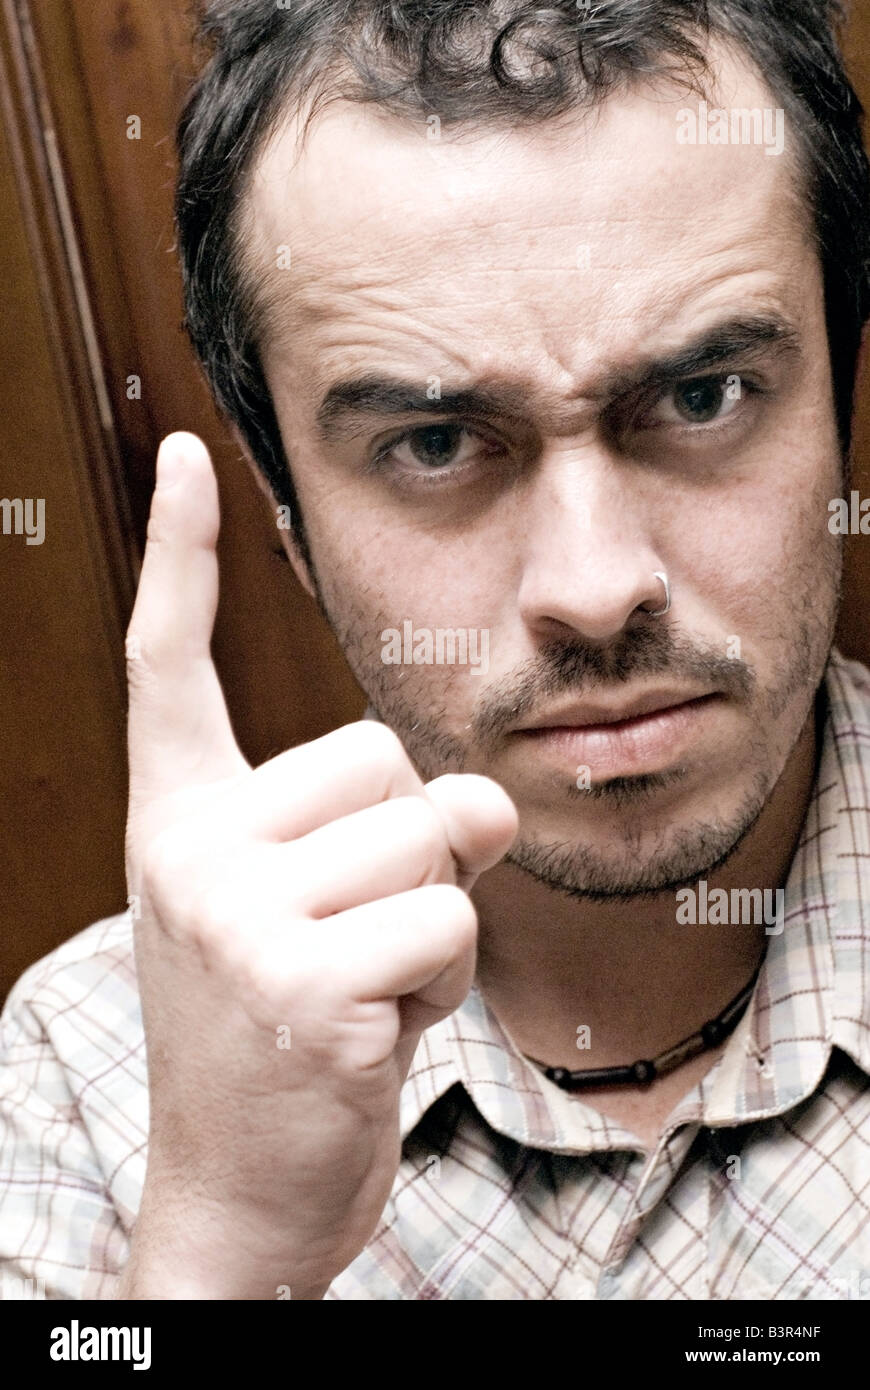 single man number one Stock Photo